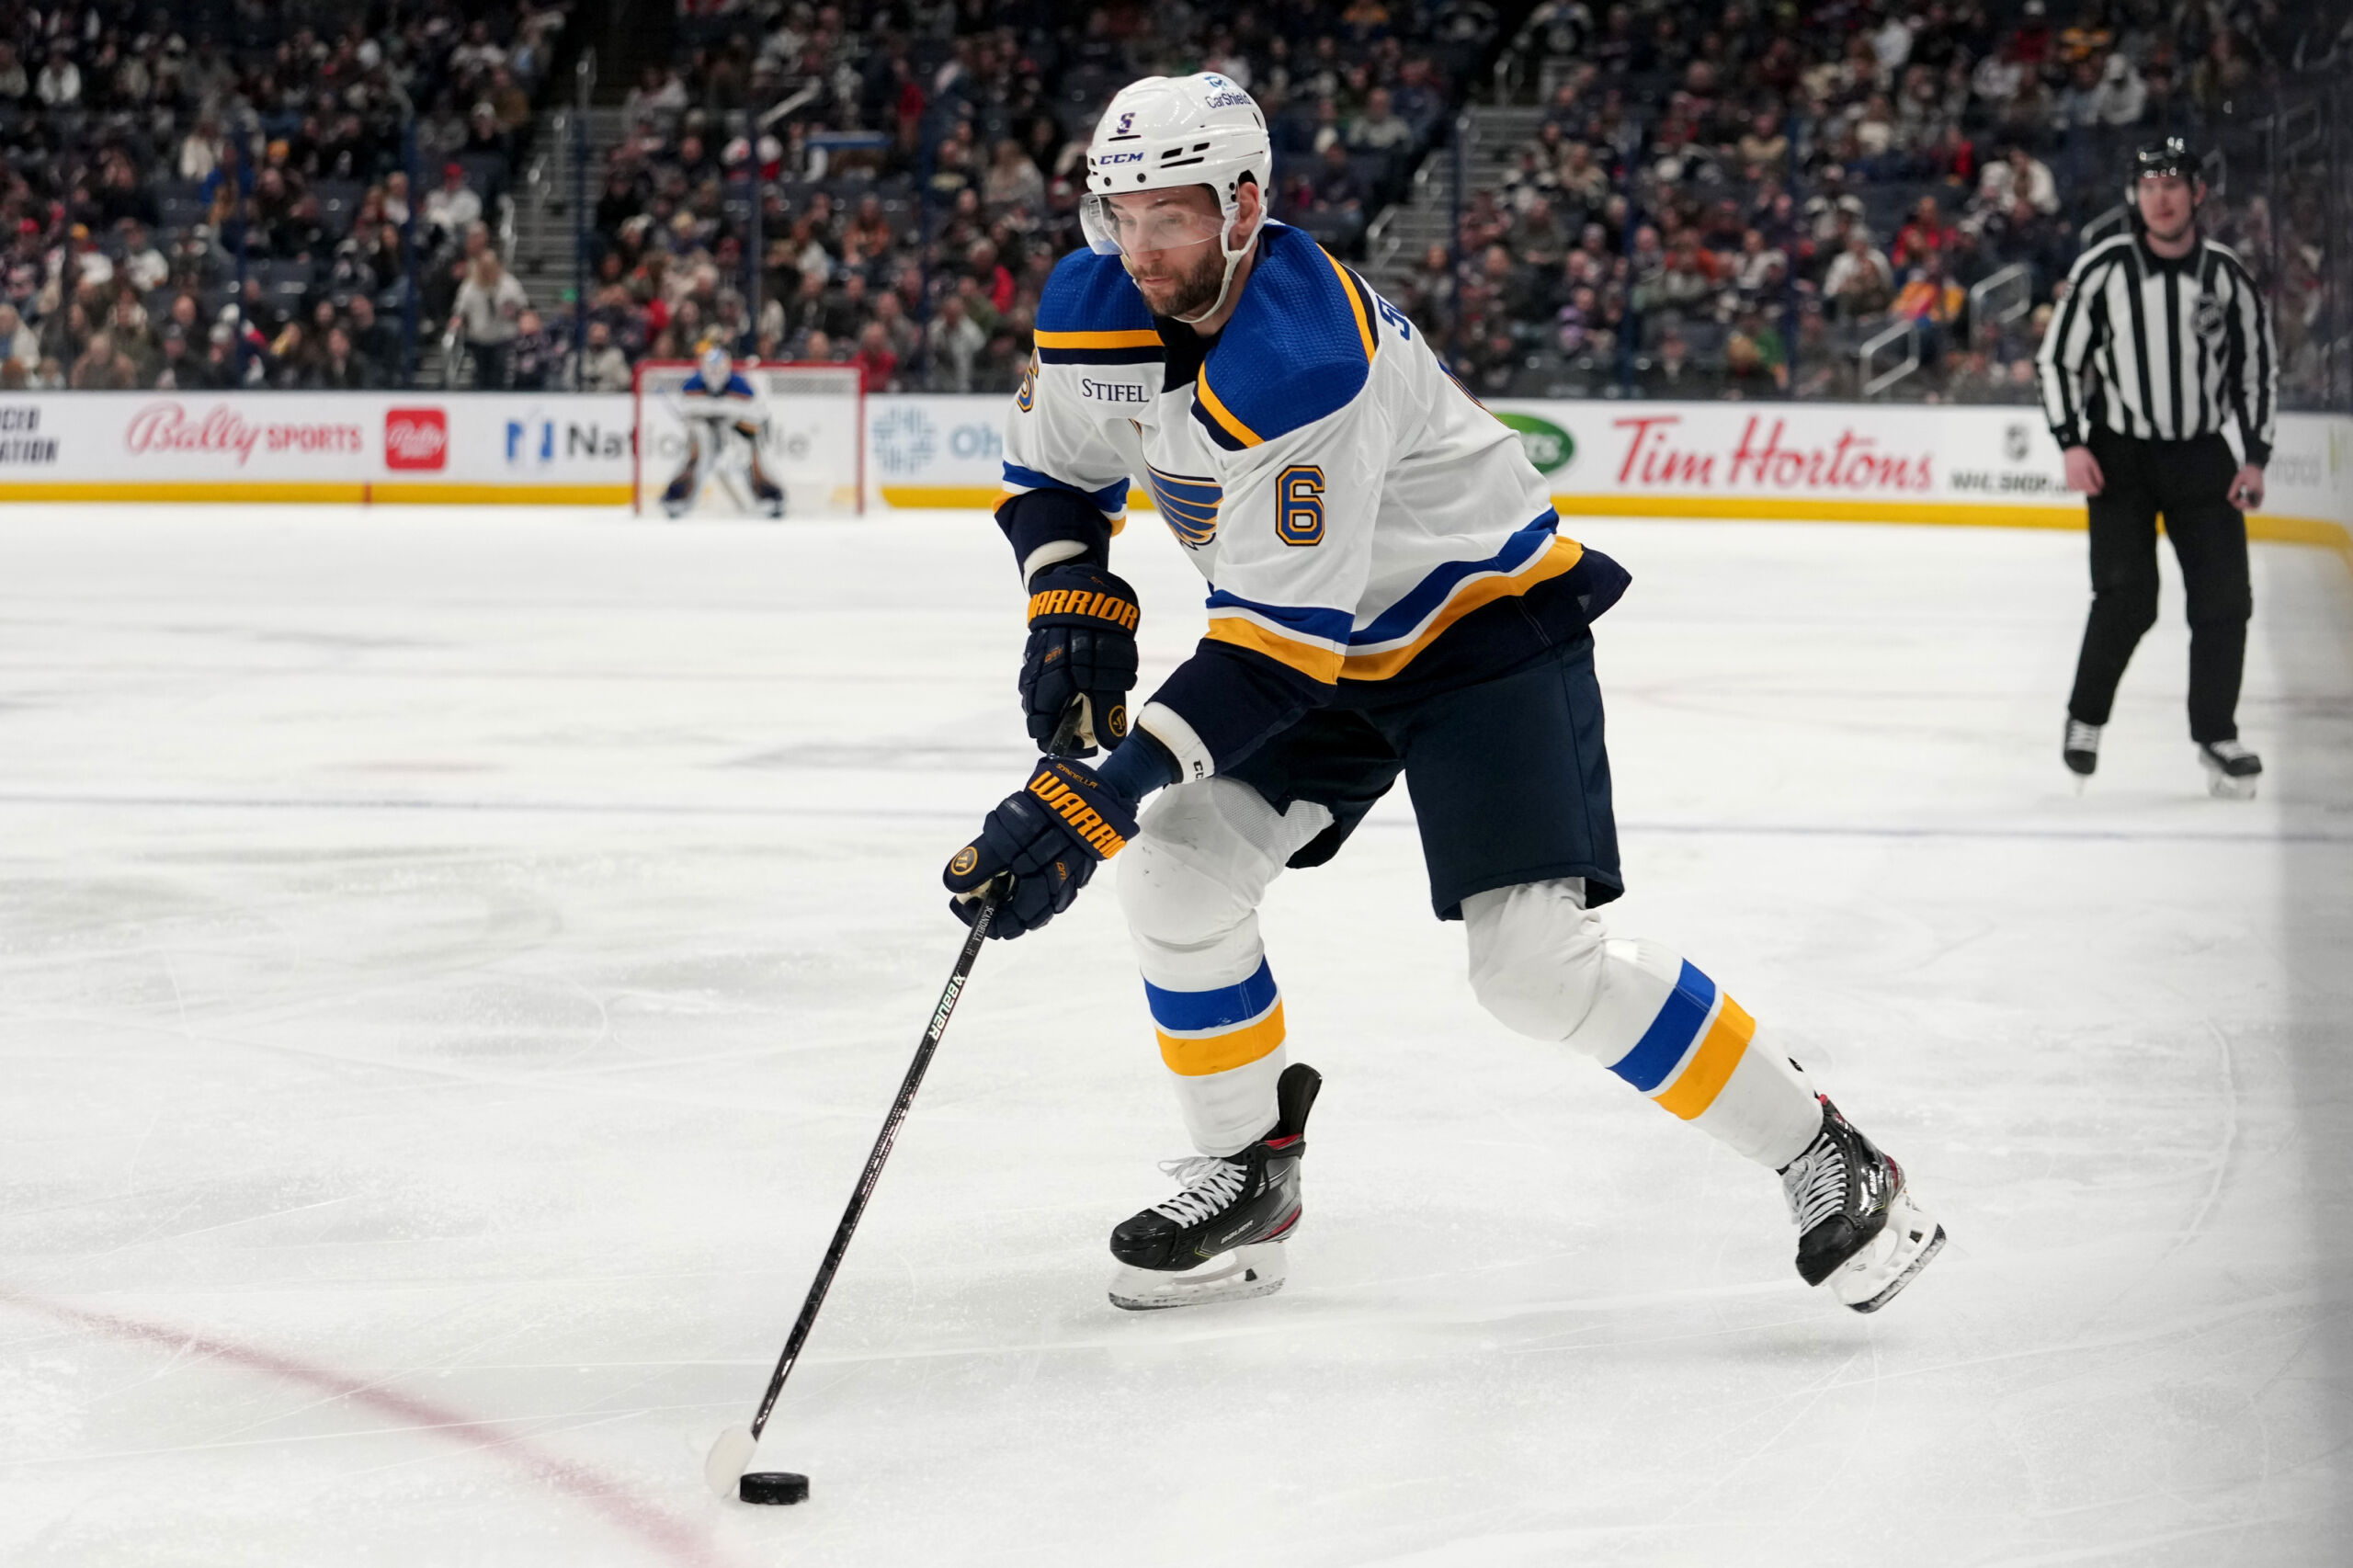 St. Louis Blues] Marco Scandella gets a high-stick to the face